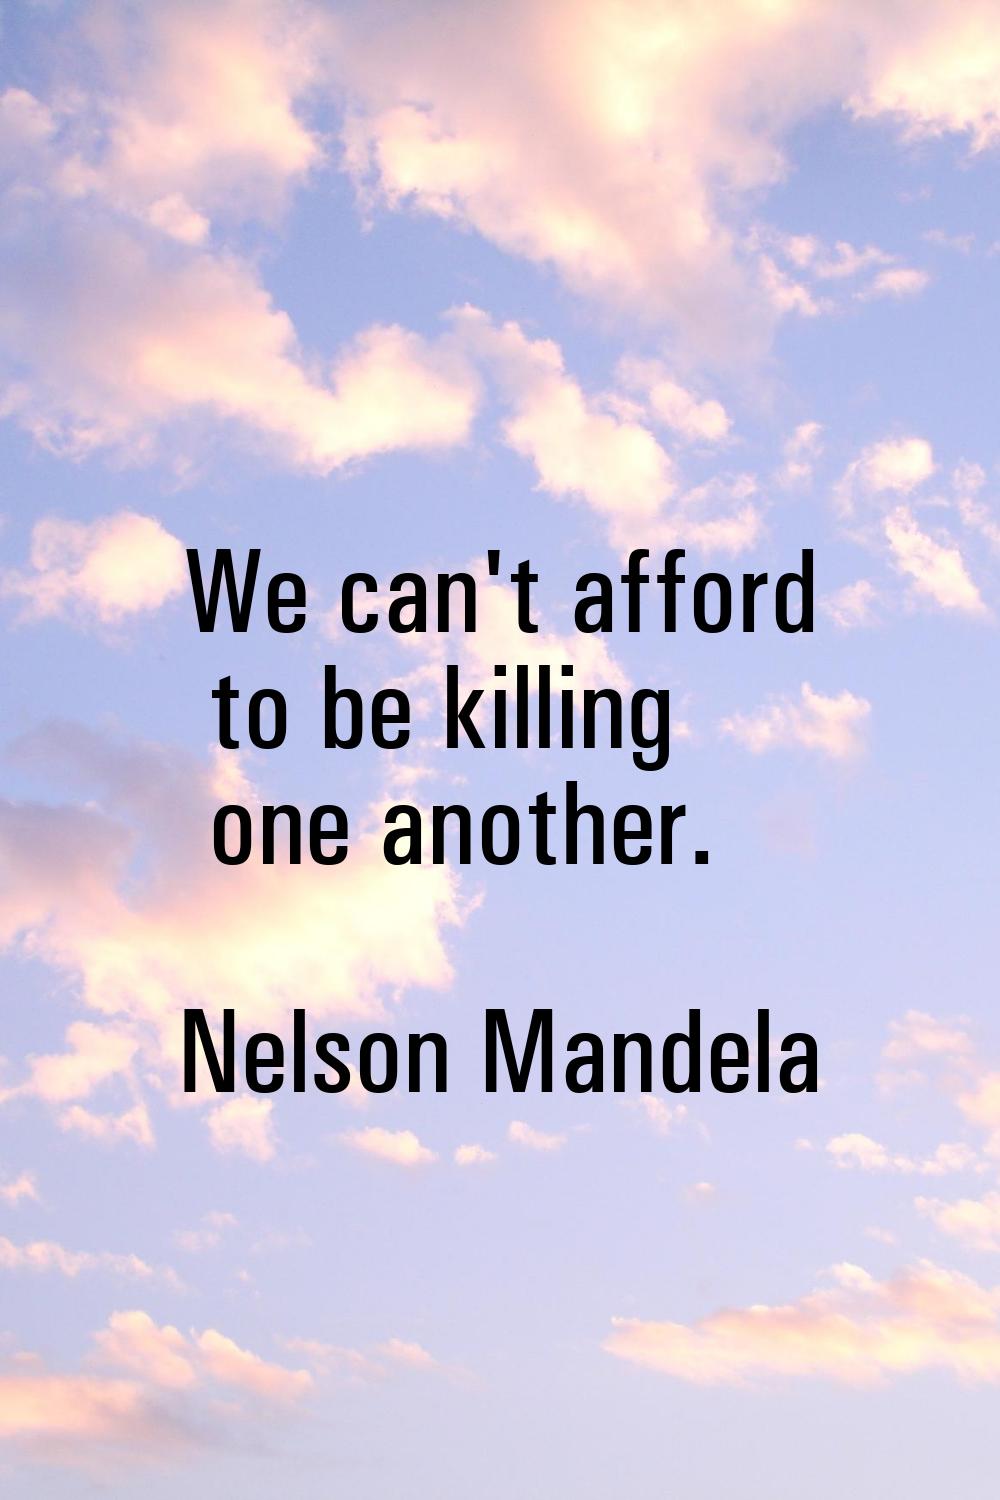 We can't afford to be killing one another.